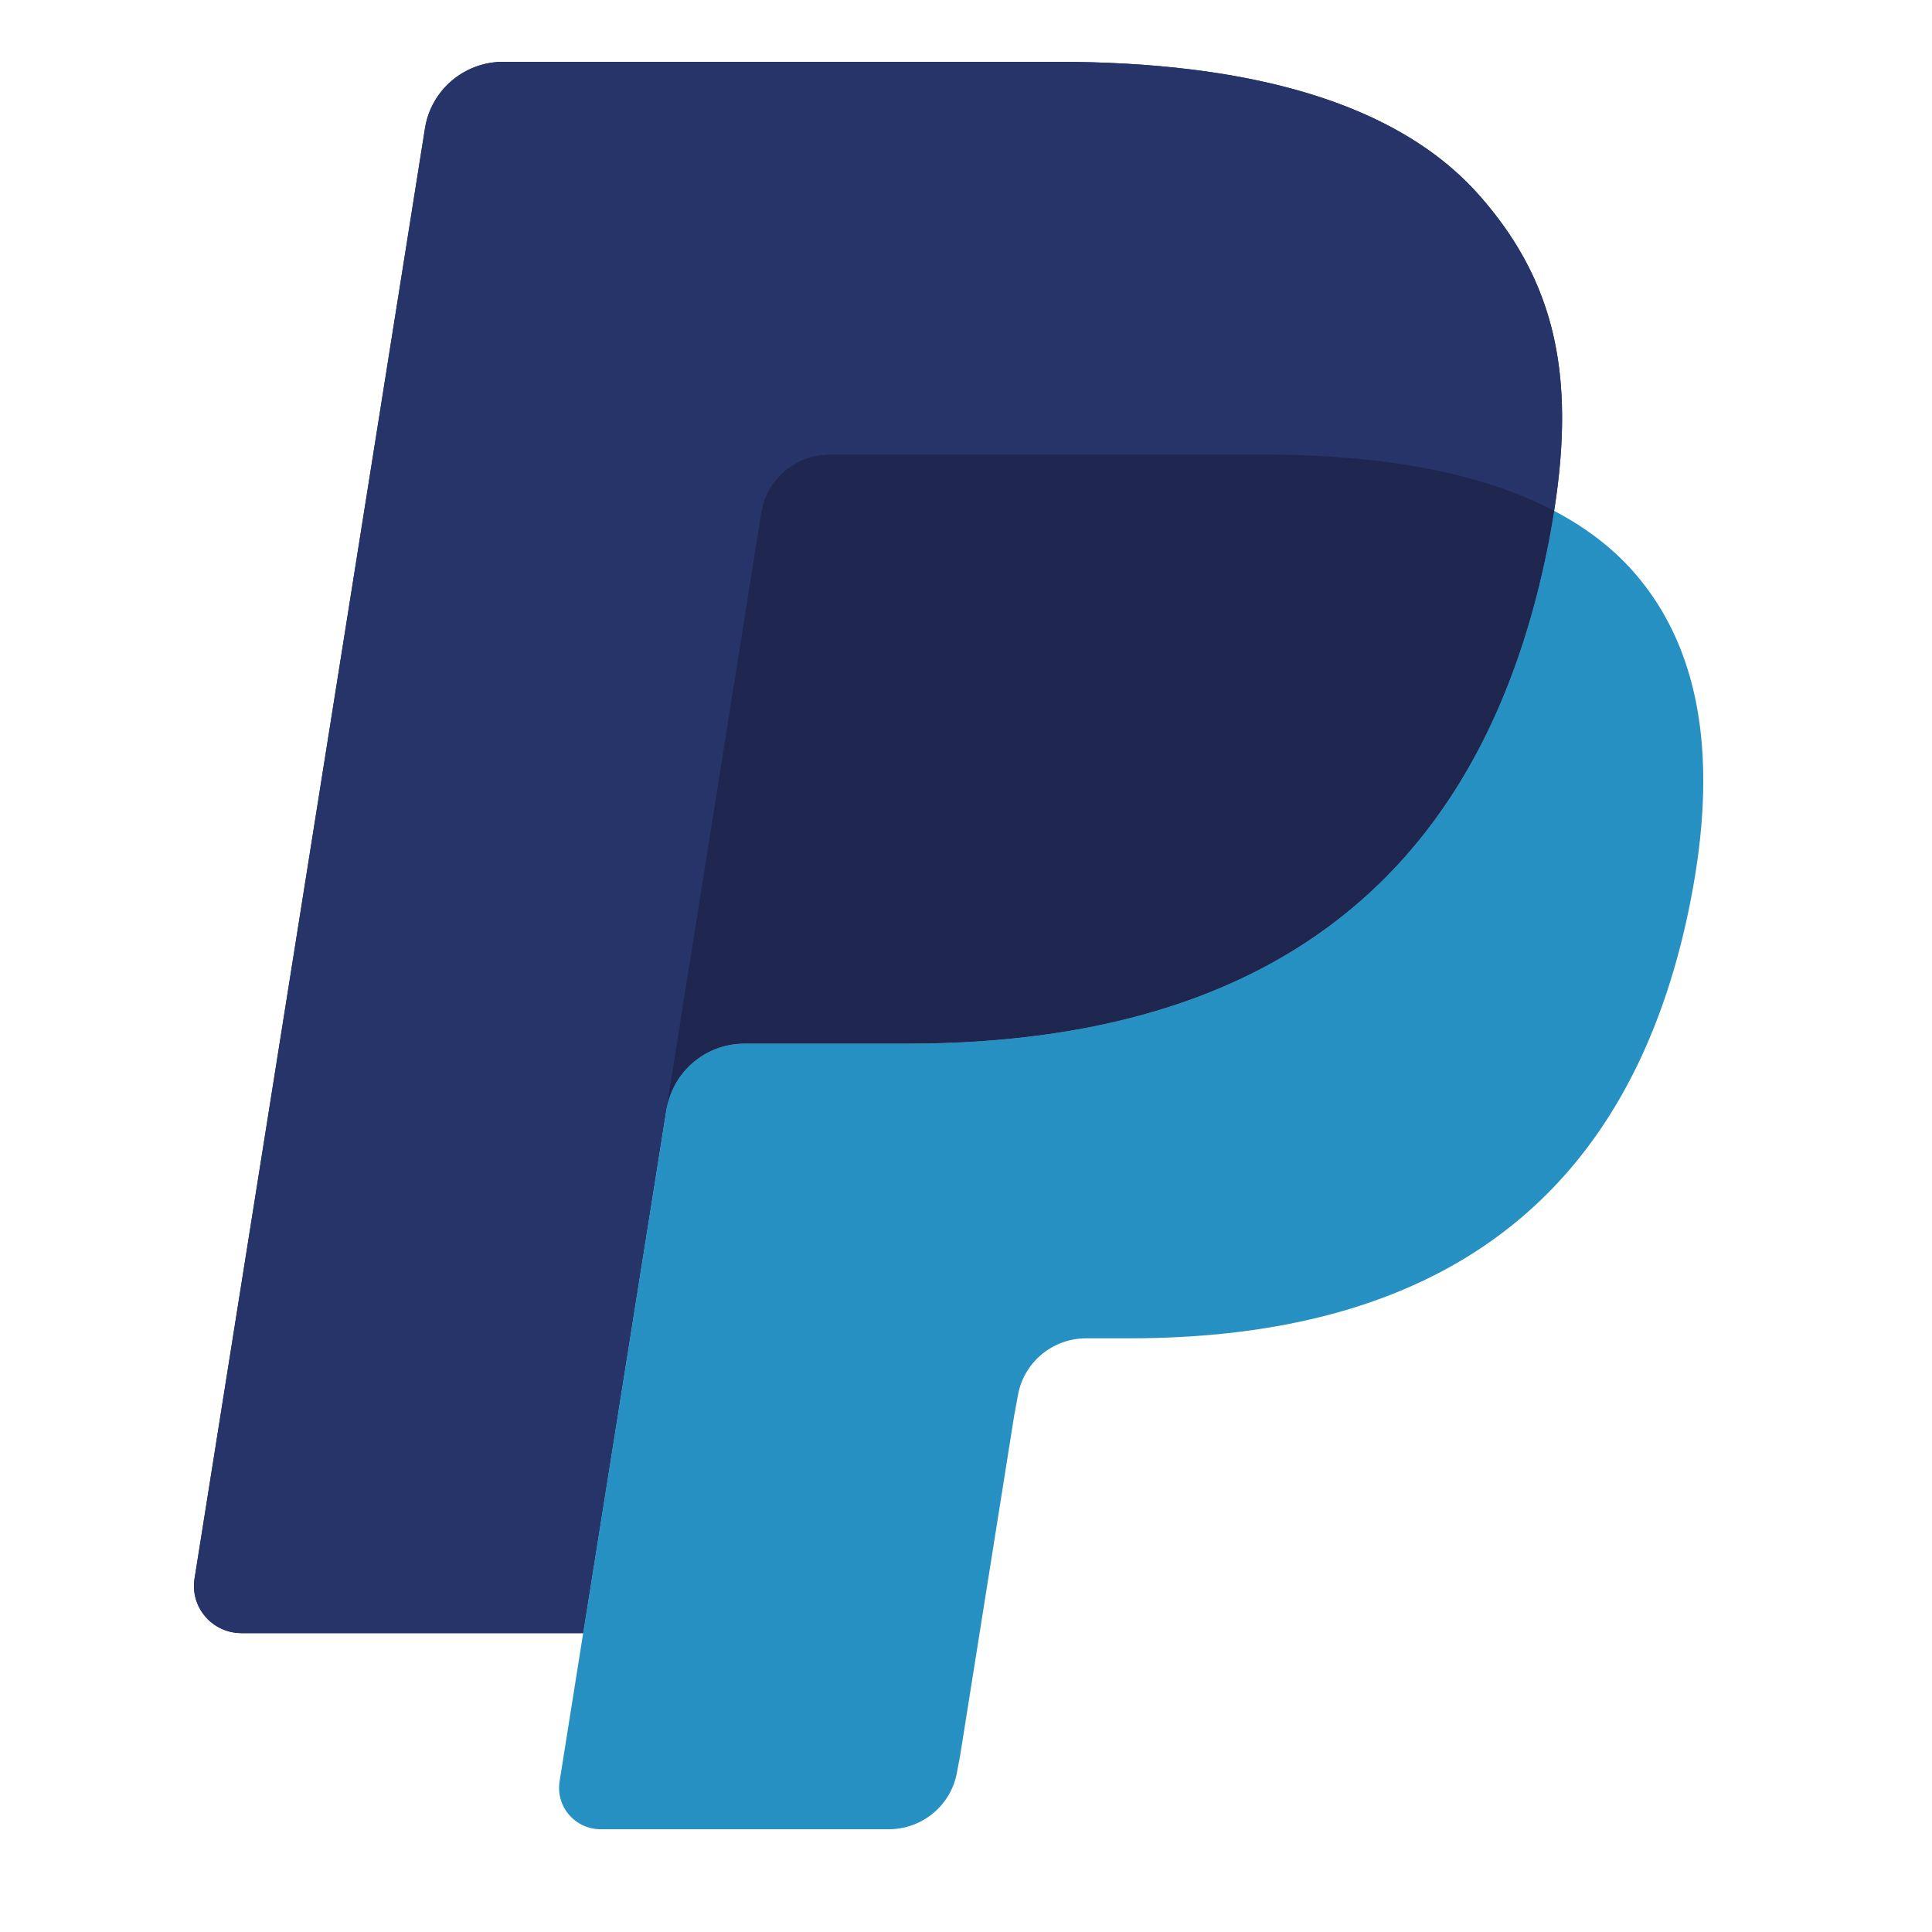 New PayPal Logo - Paypal Logo, Paypal Symbol, Meaning, History and Evolution